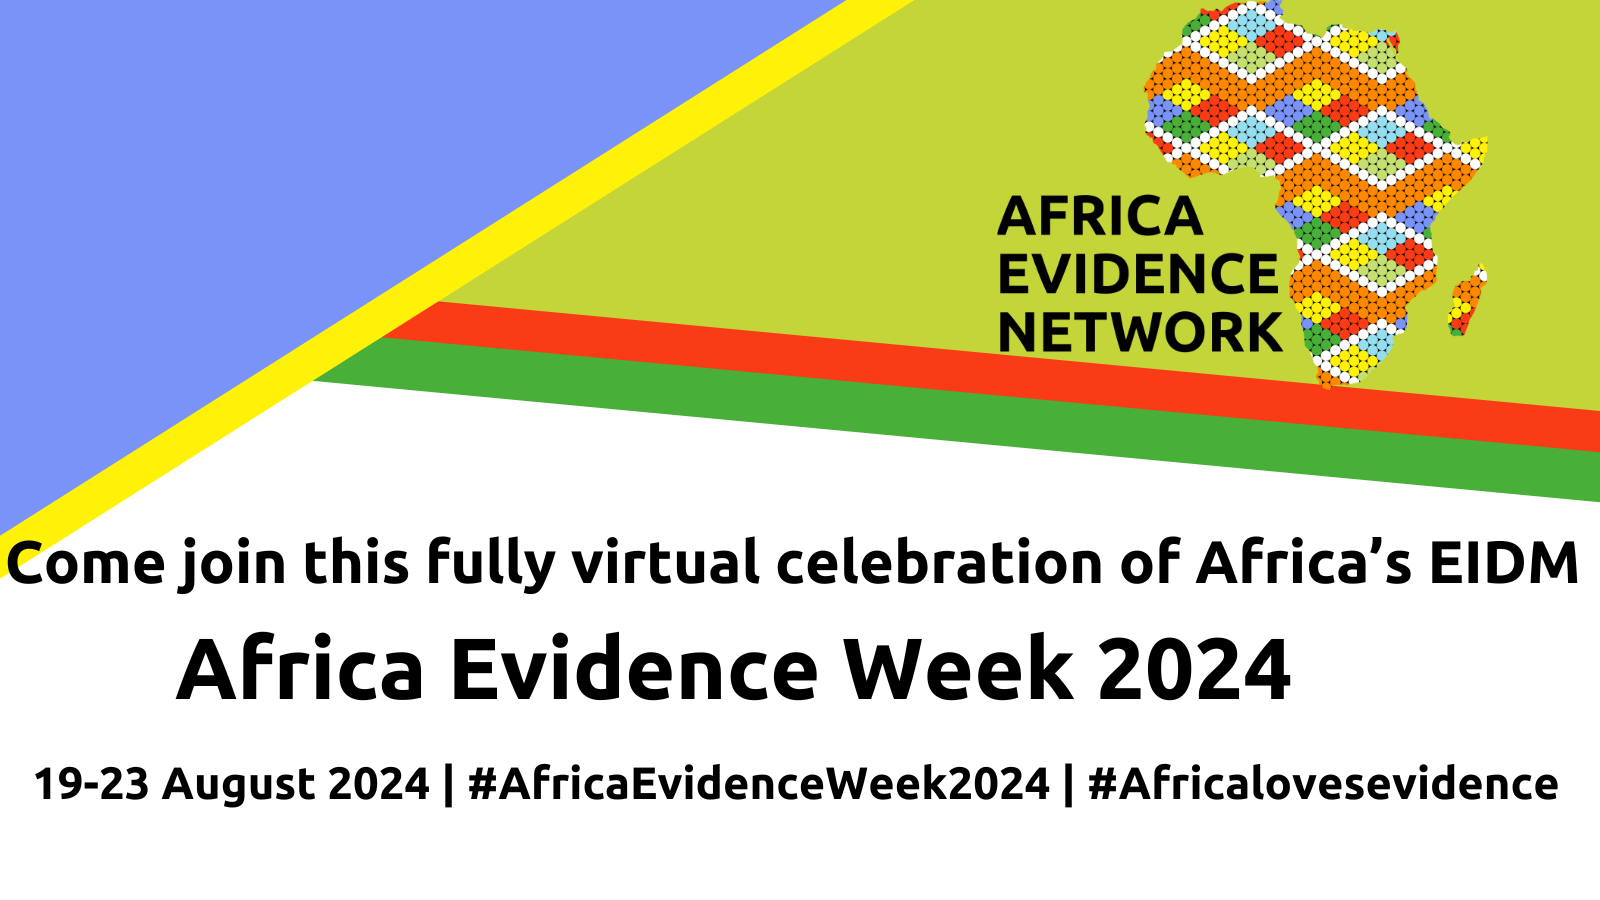 Africa Evidence Week 2024 concept note